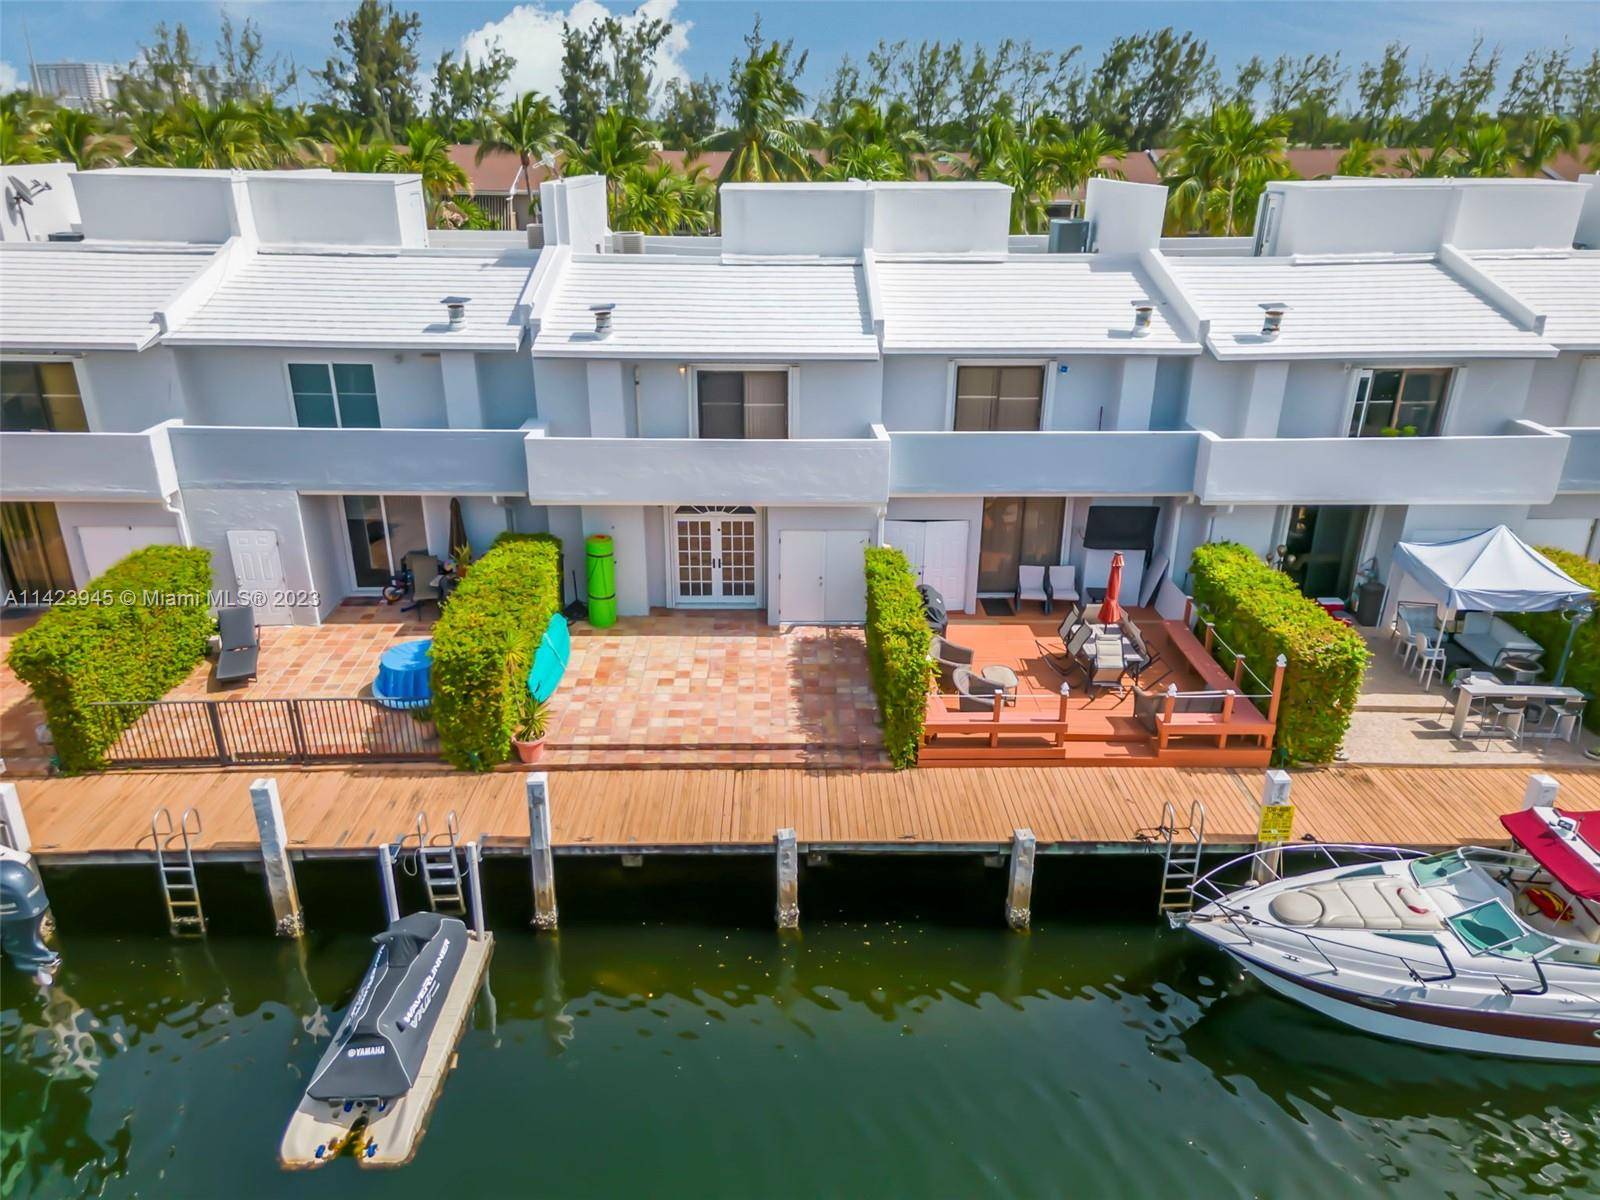 30 FEET DOCK included. Waterfront Townhome 3 bedrooms 2 1 2 bathrooms.